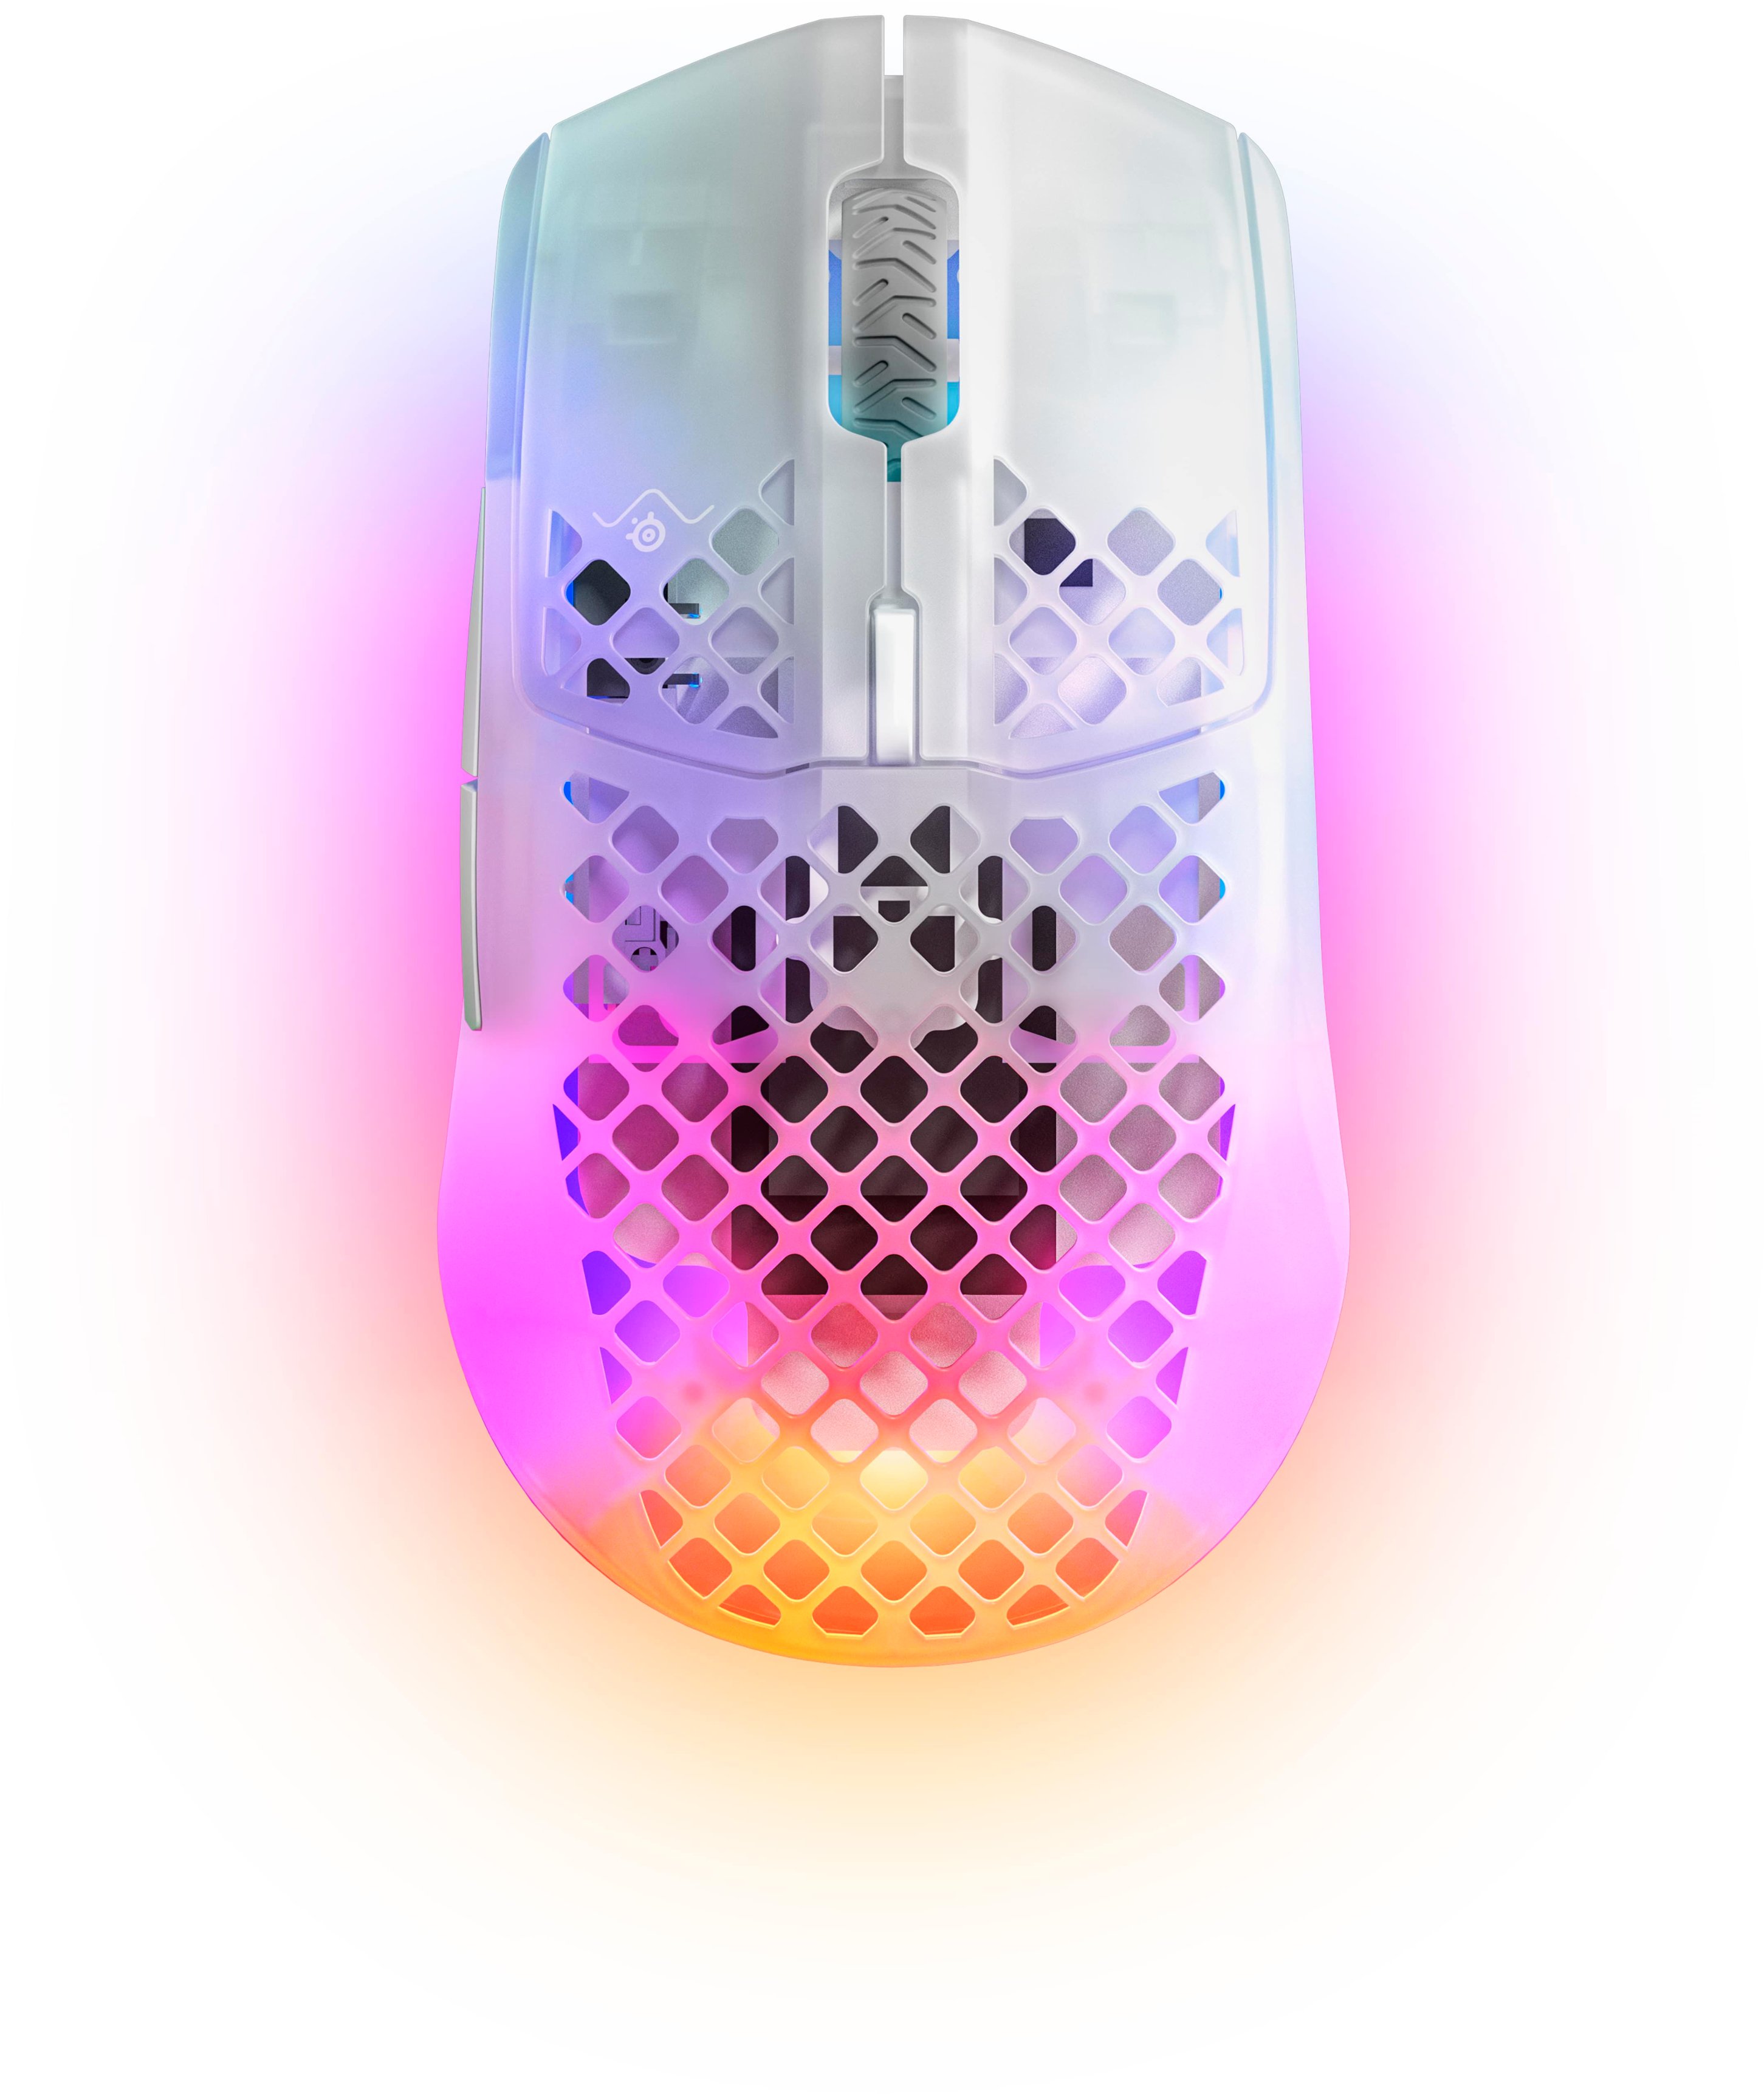 SteelSeries - Aerox 3 Ghost Wireless Optical Gaming Mouse with Ultra-lightweight Translucent Design - White